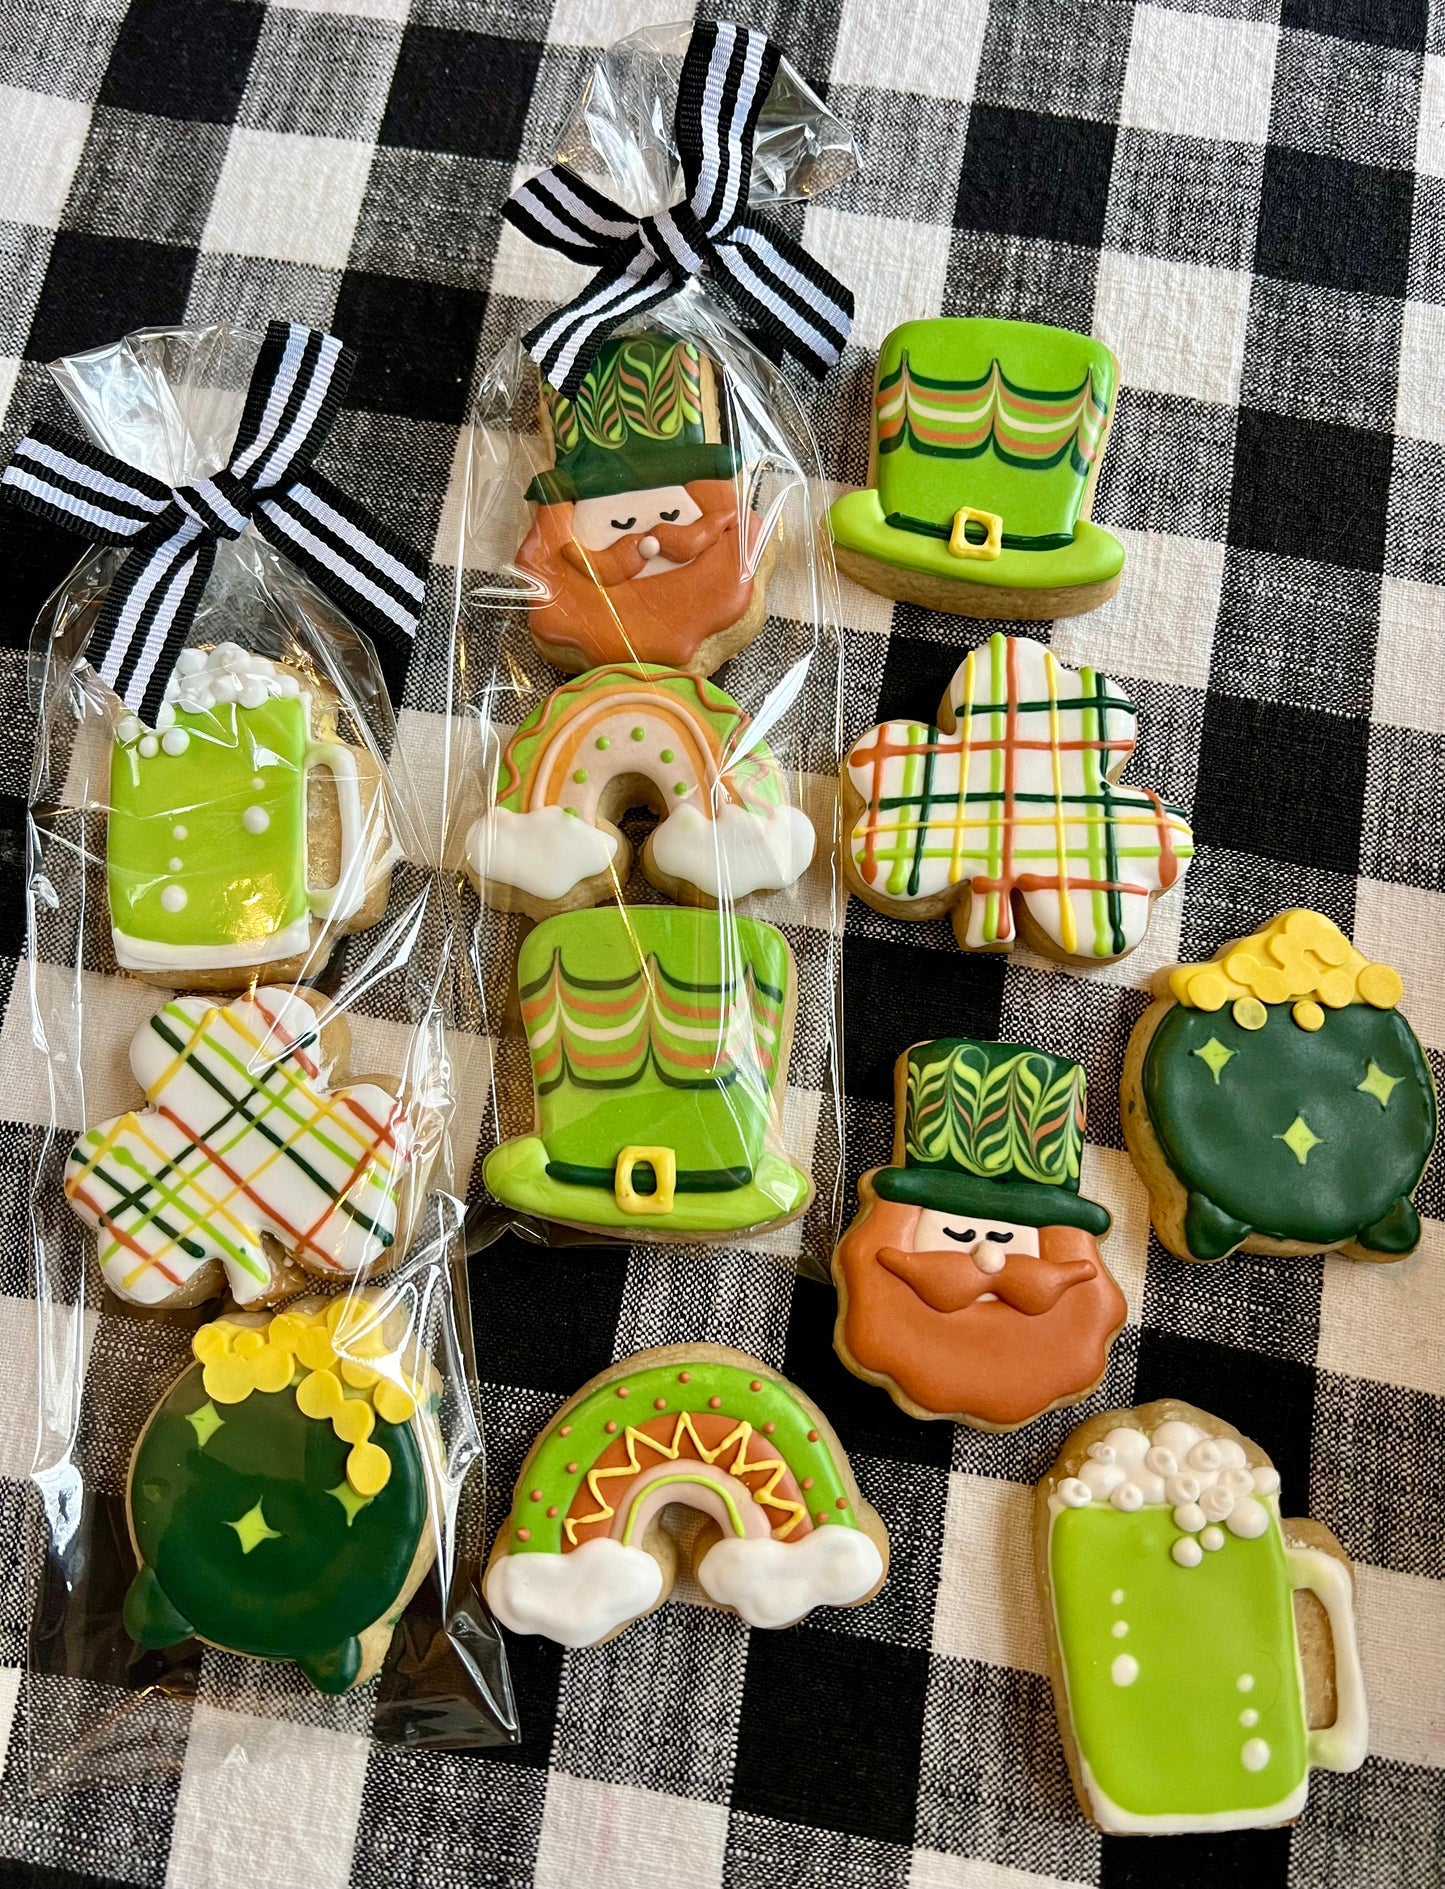 Cookie Decorating Class | Sun. March 10th 11am-1pm